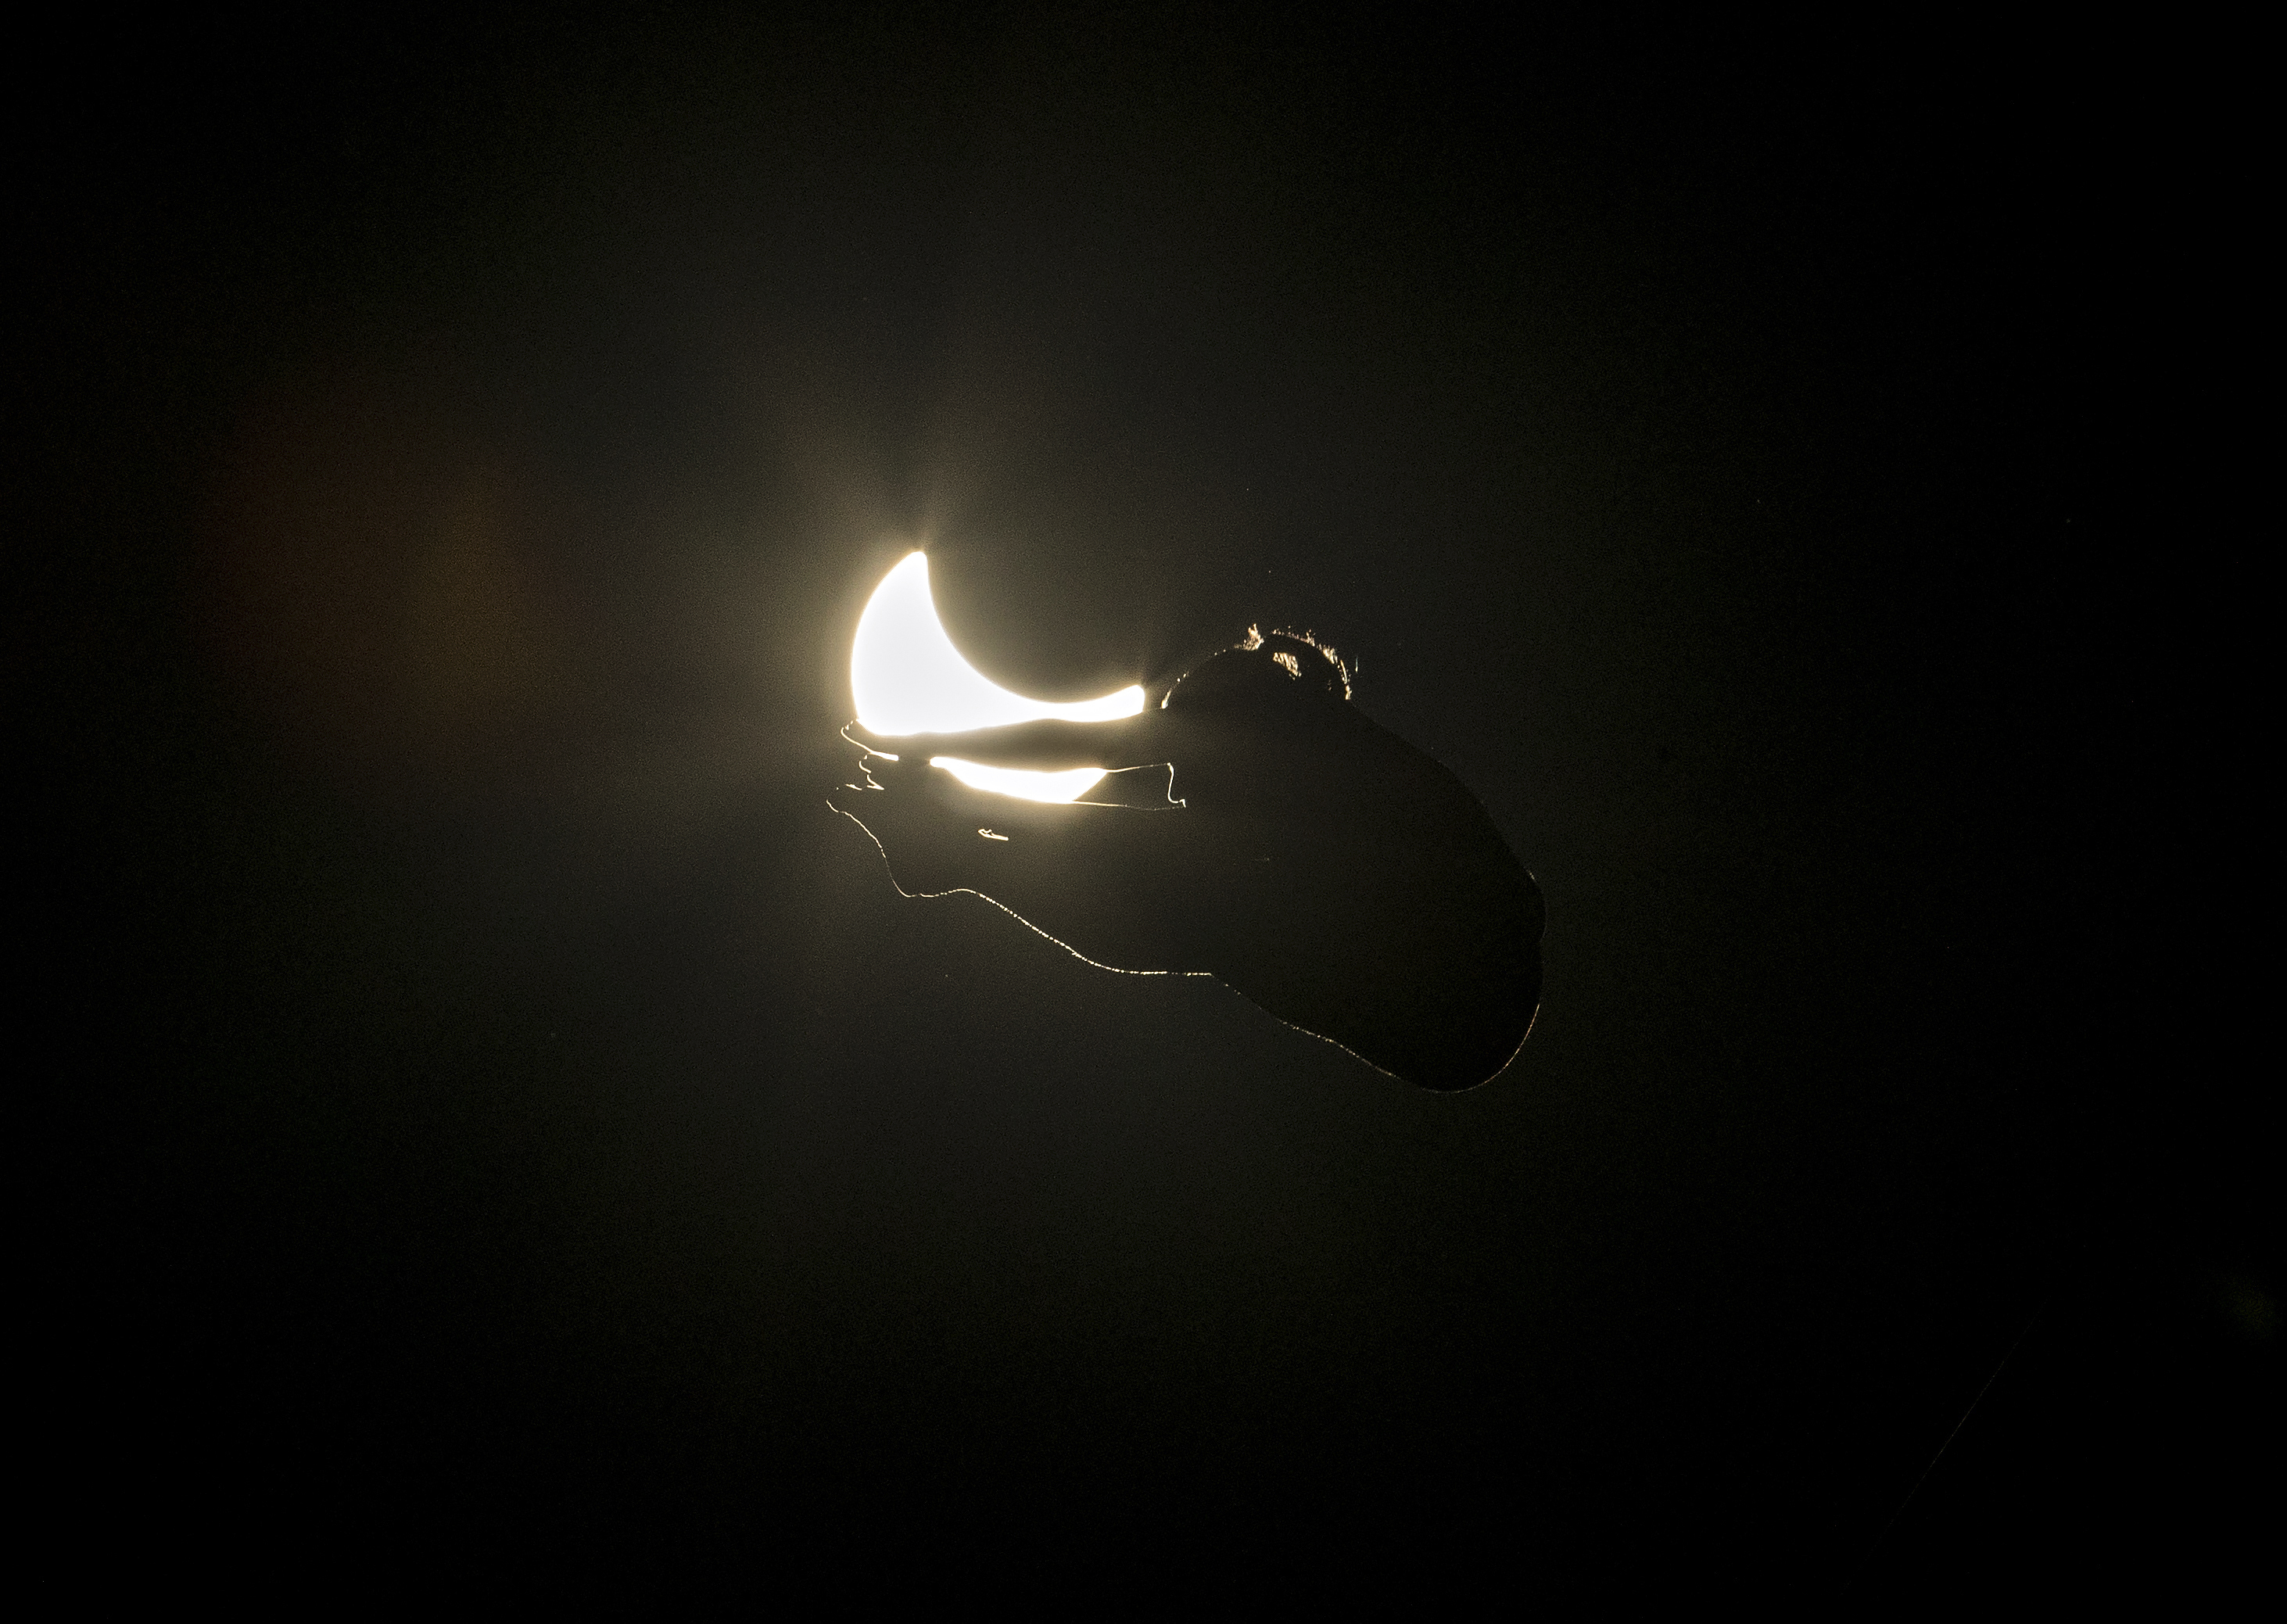 Helena Merten of Australia dives from the 20 meter platform into a pool in front of a full solar eclipse in McMinnville, OR, USA, on 21 August, 2017. // Dustin Snipes/Red Bull Content Pool // via AP Images  // For more content, pictures and videos like this please go to http://www.redbullcontentpool.com